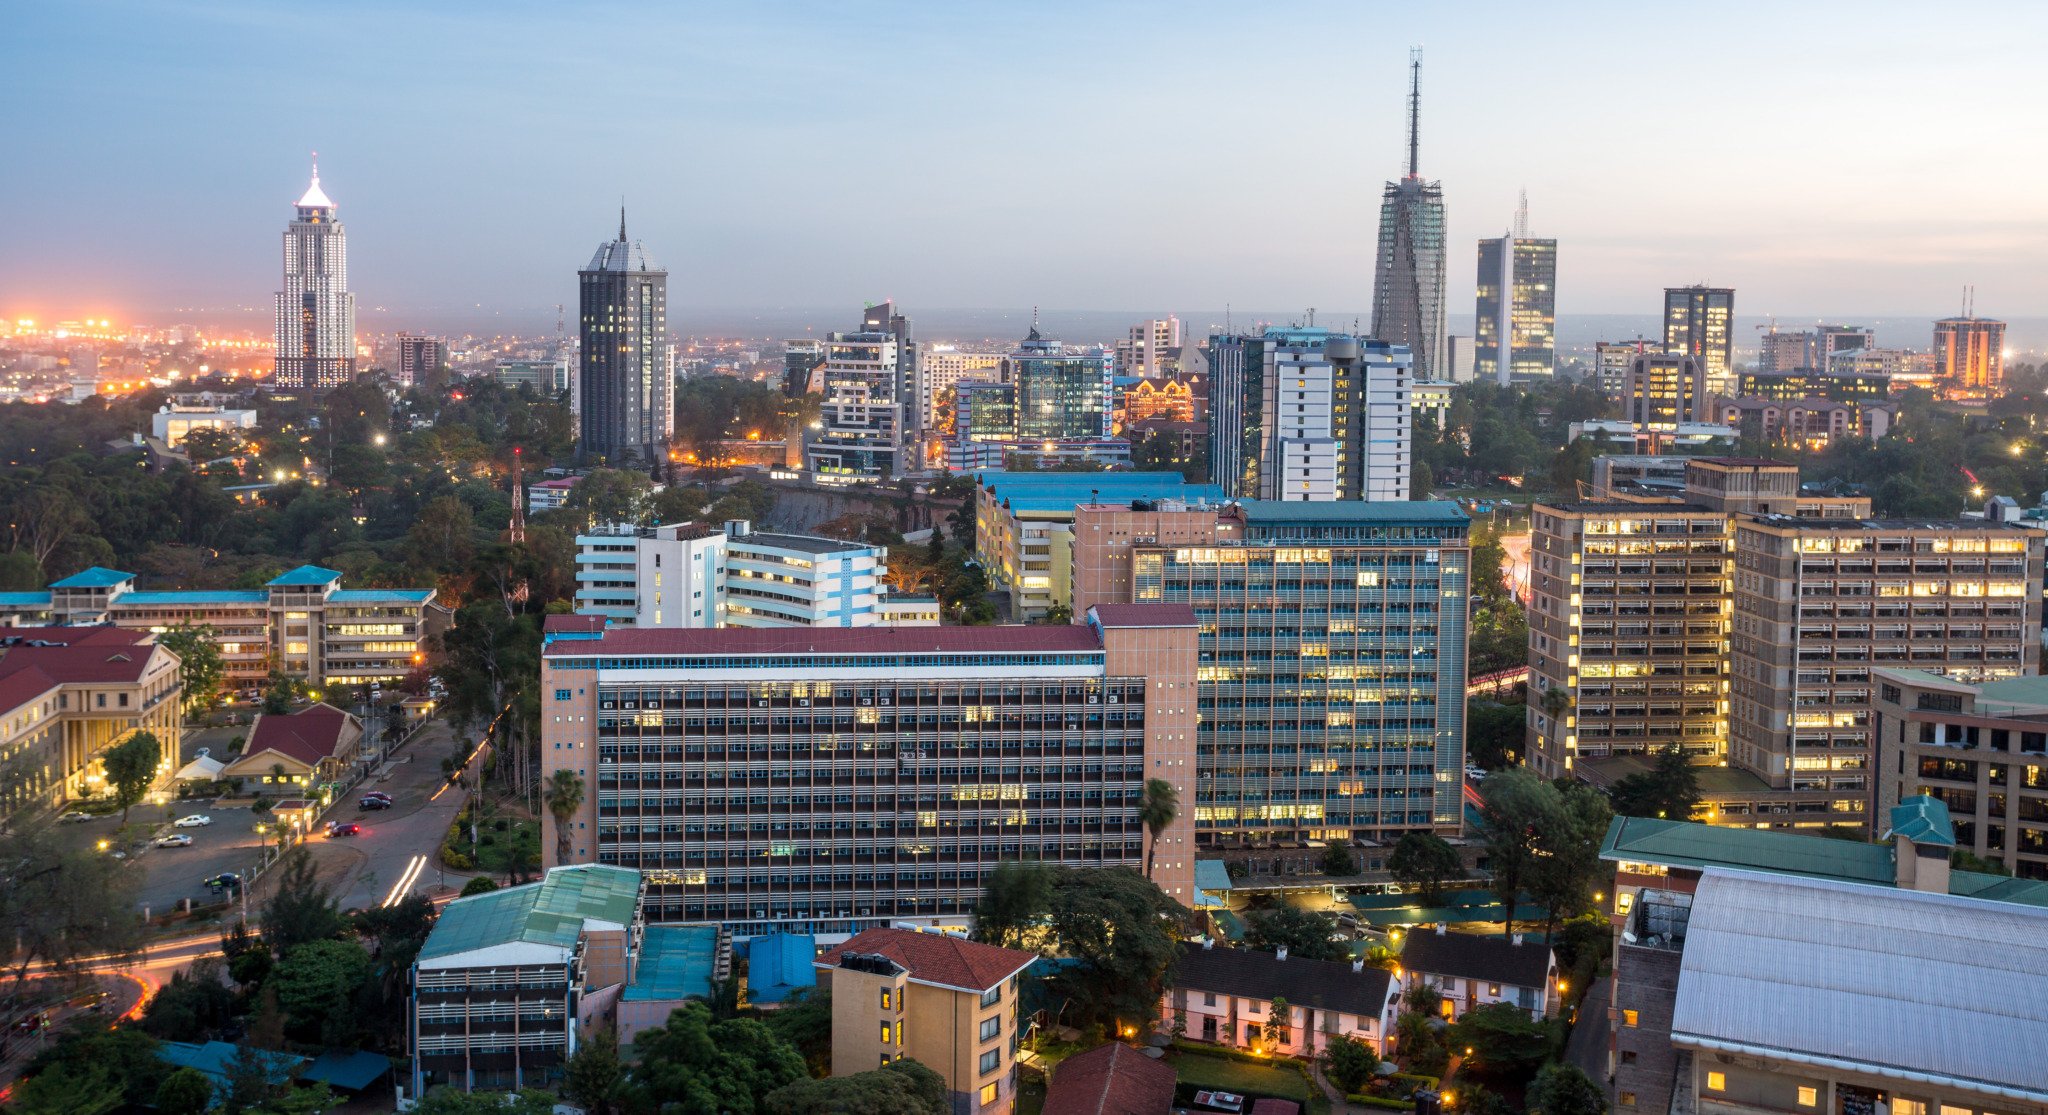 East Africa’s Top Banks in 2021